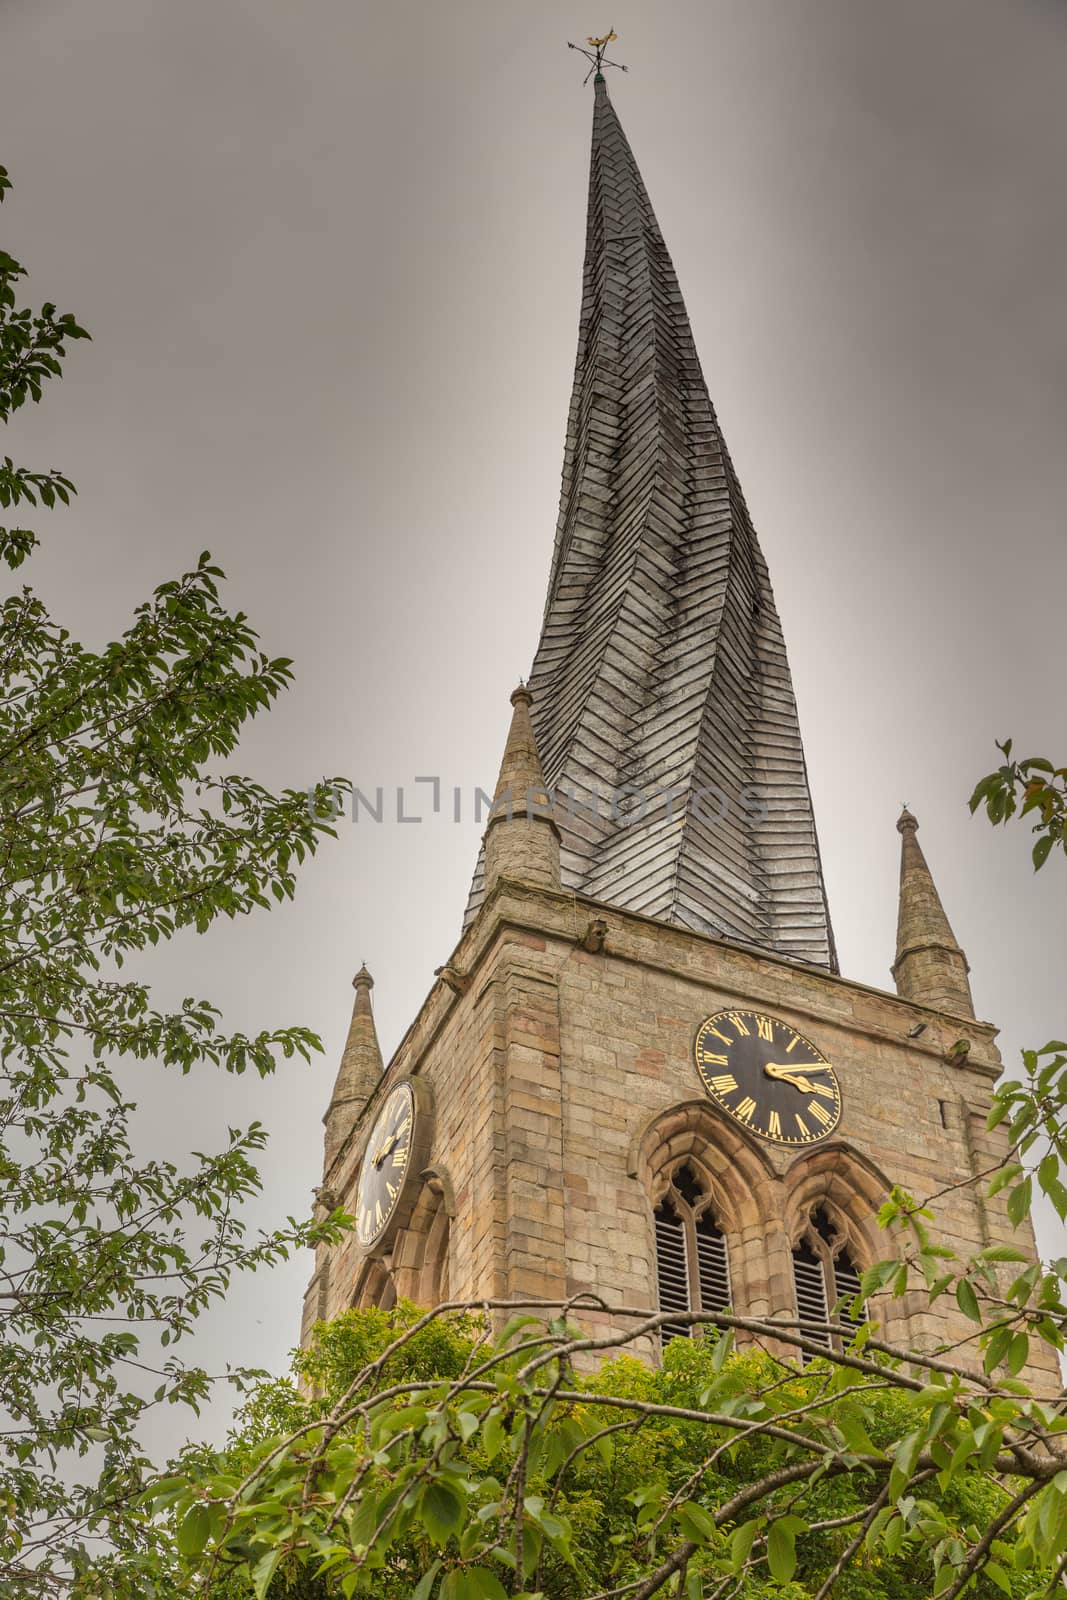 The Crooked Spire in Chesterfield, Derbyshire , England by chrisukphoto